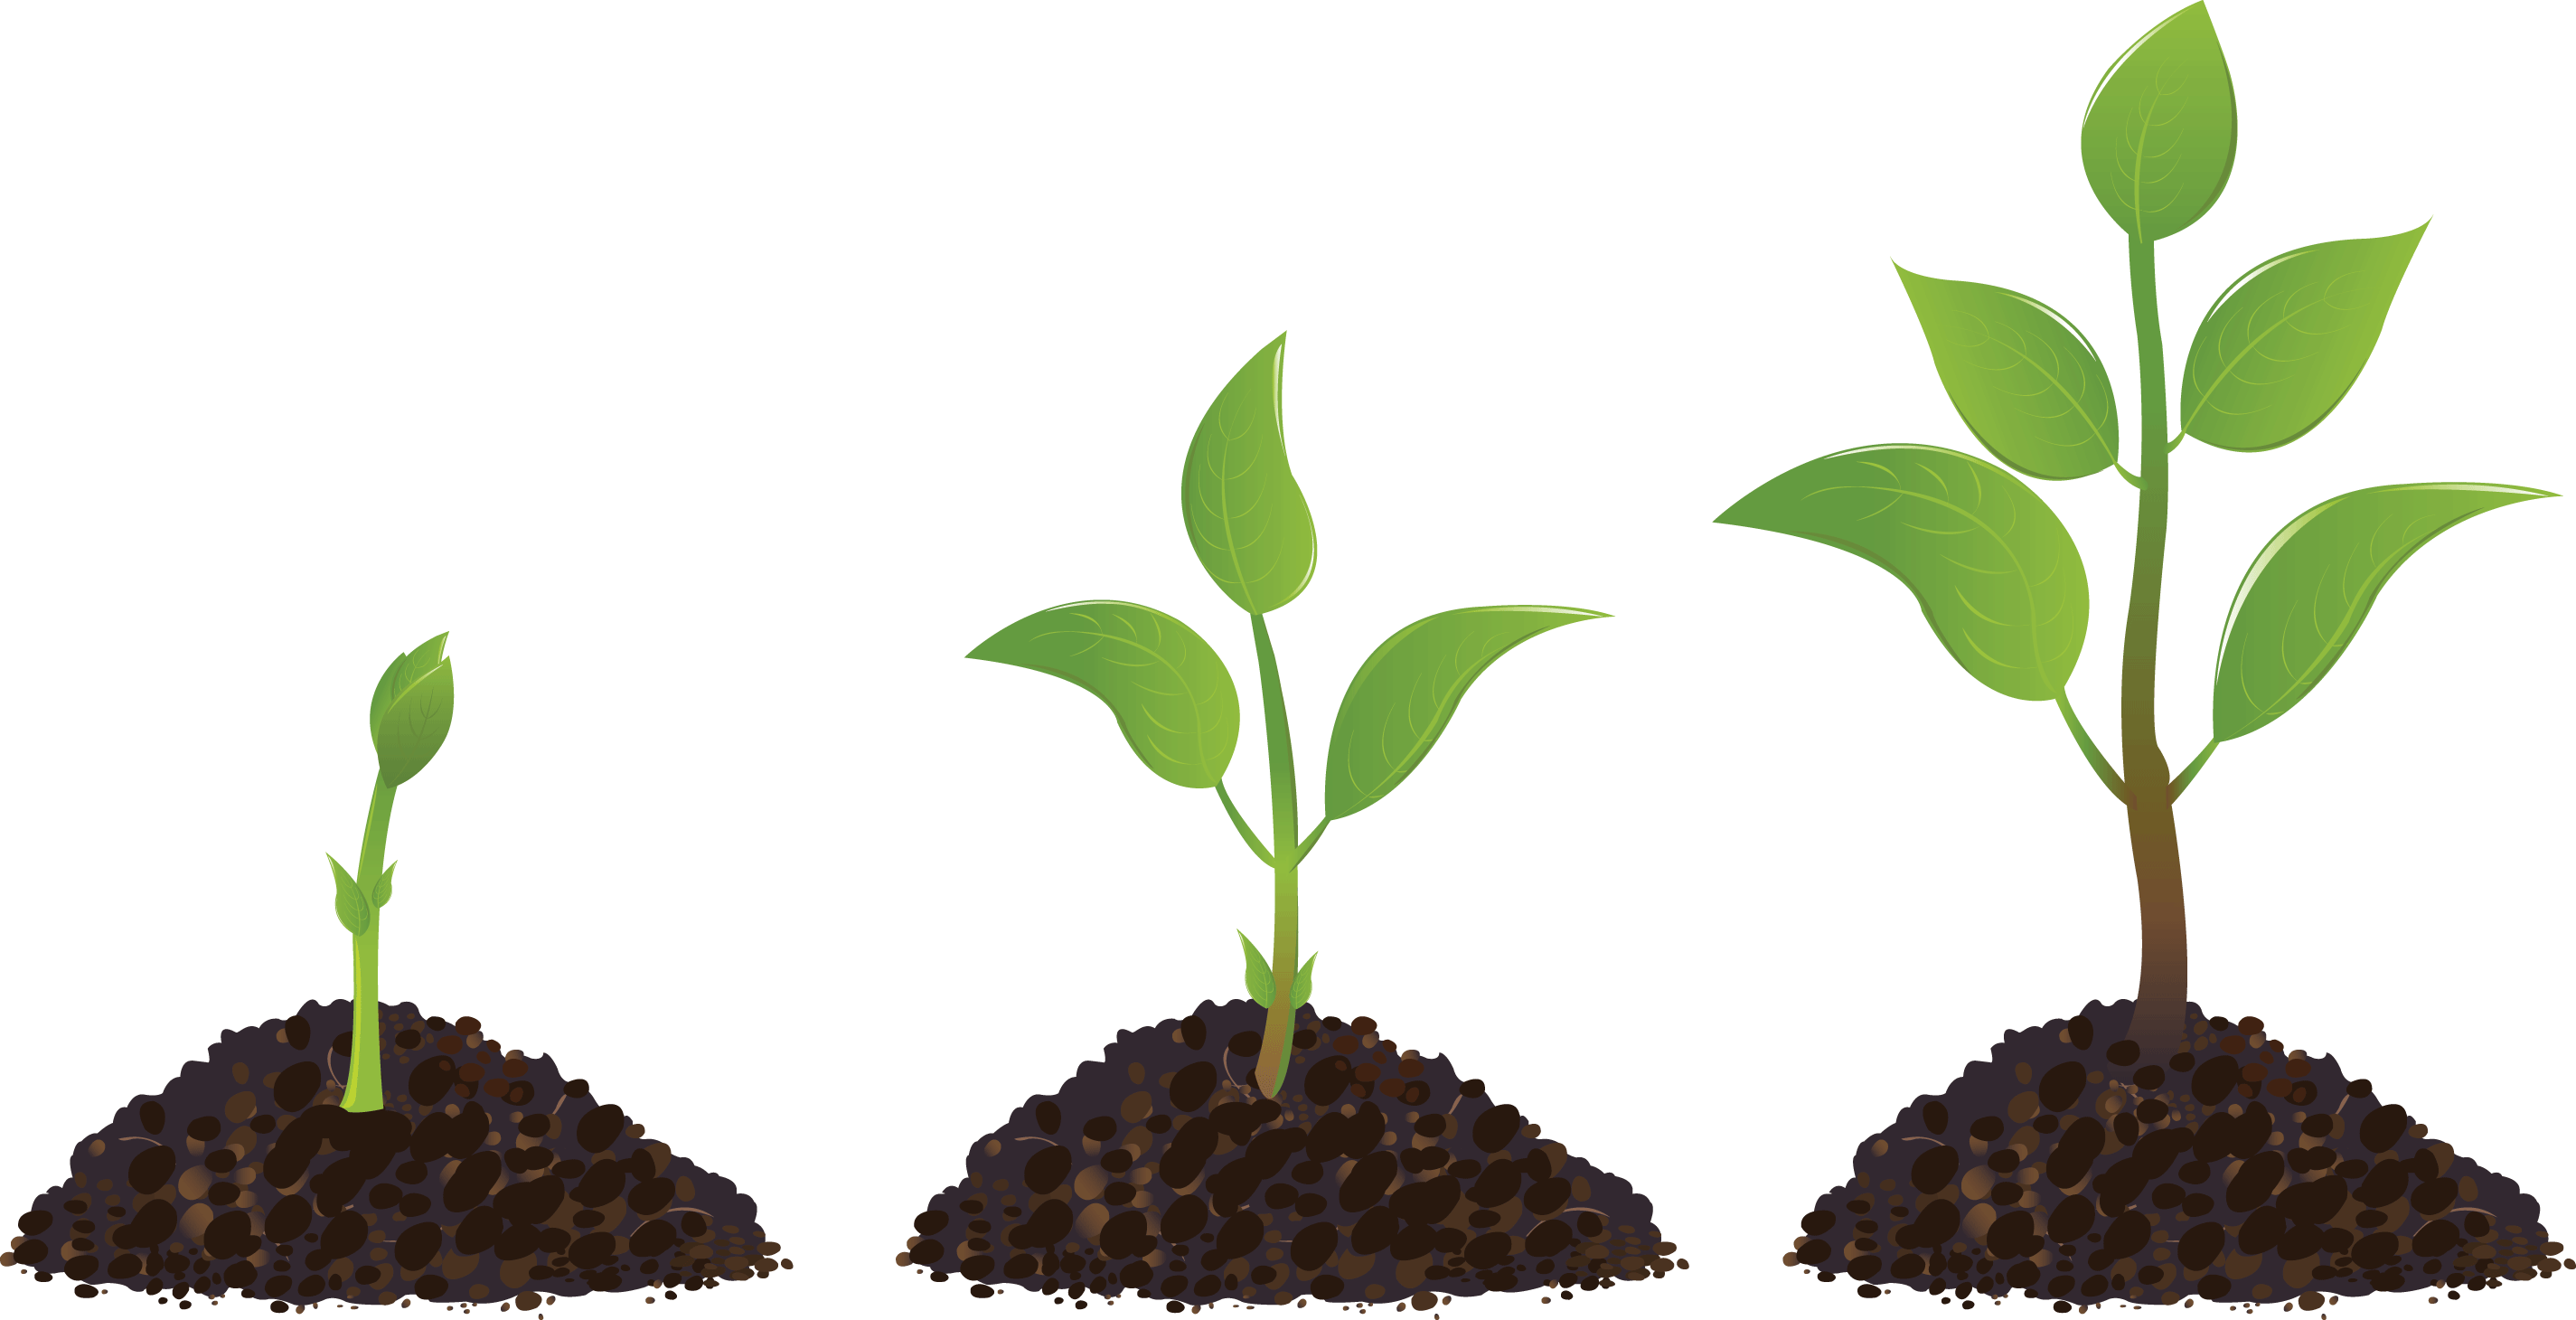 Seedling sprouting drawing plant. Planting clipart sprout